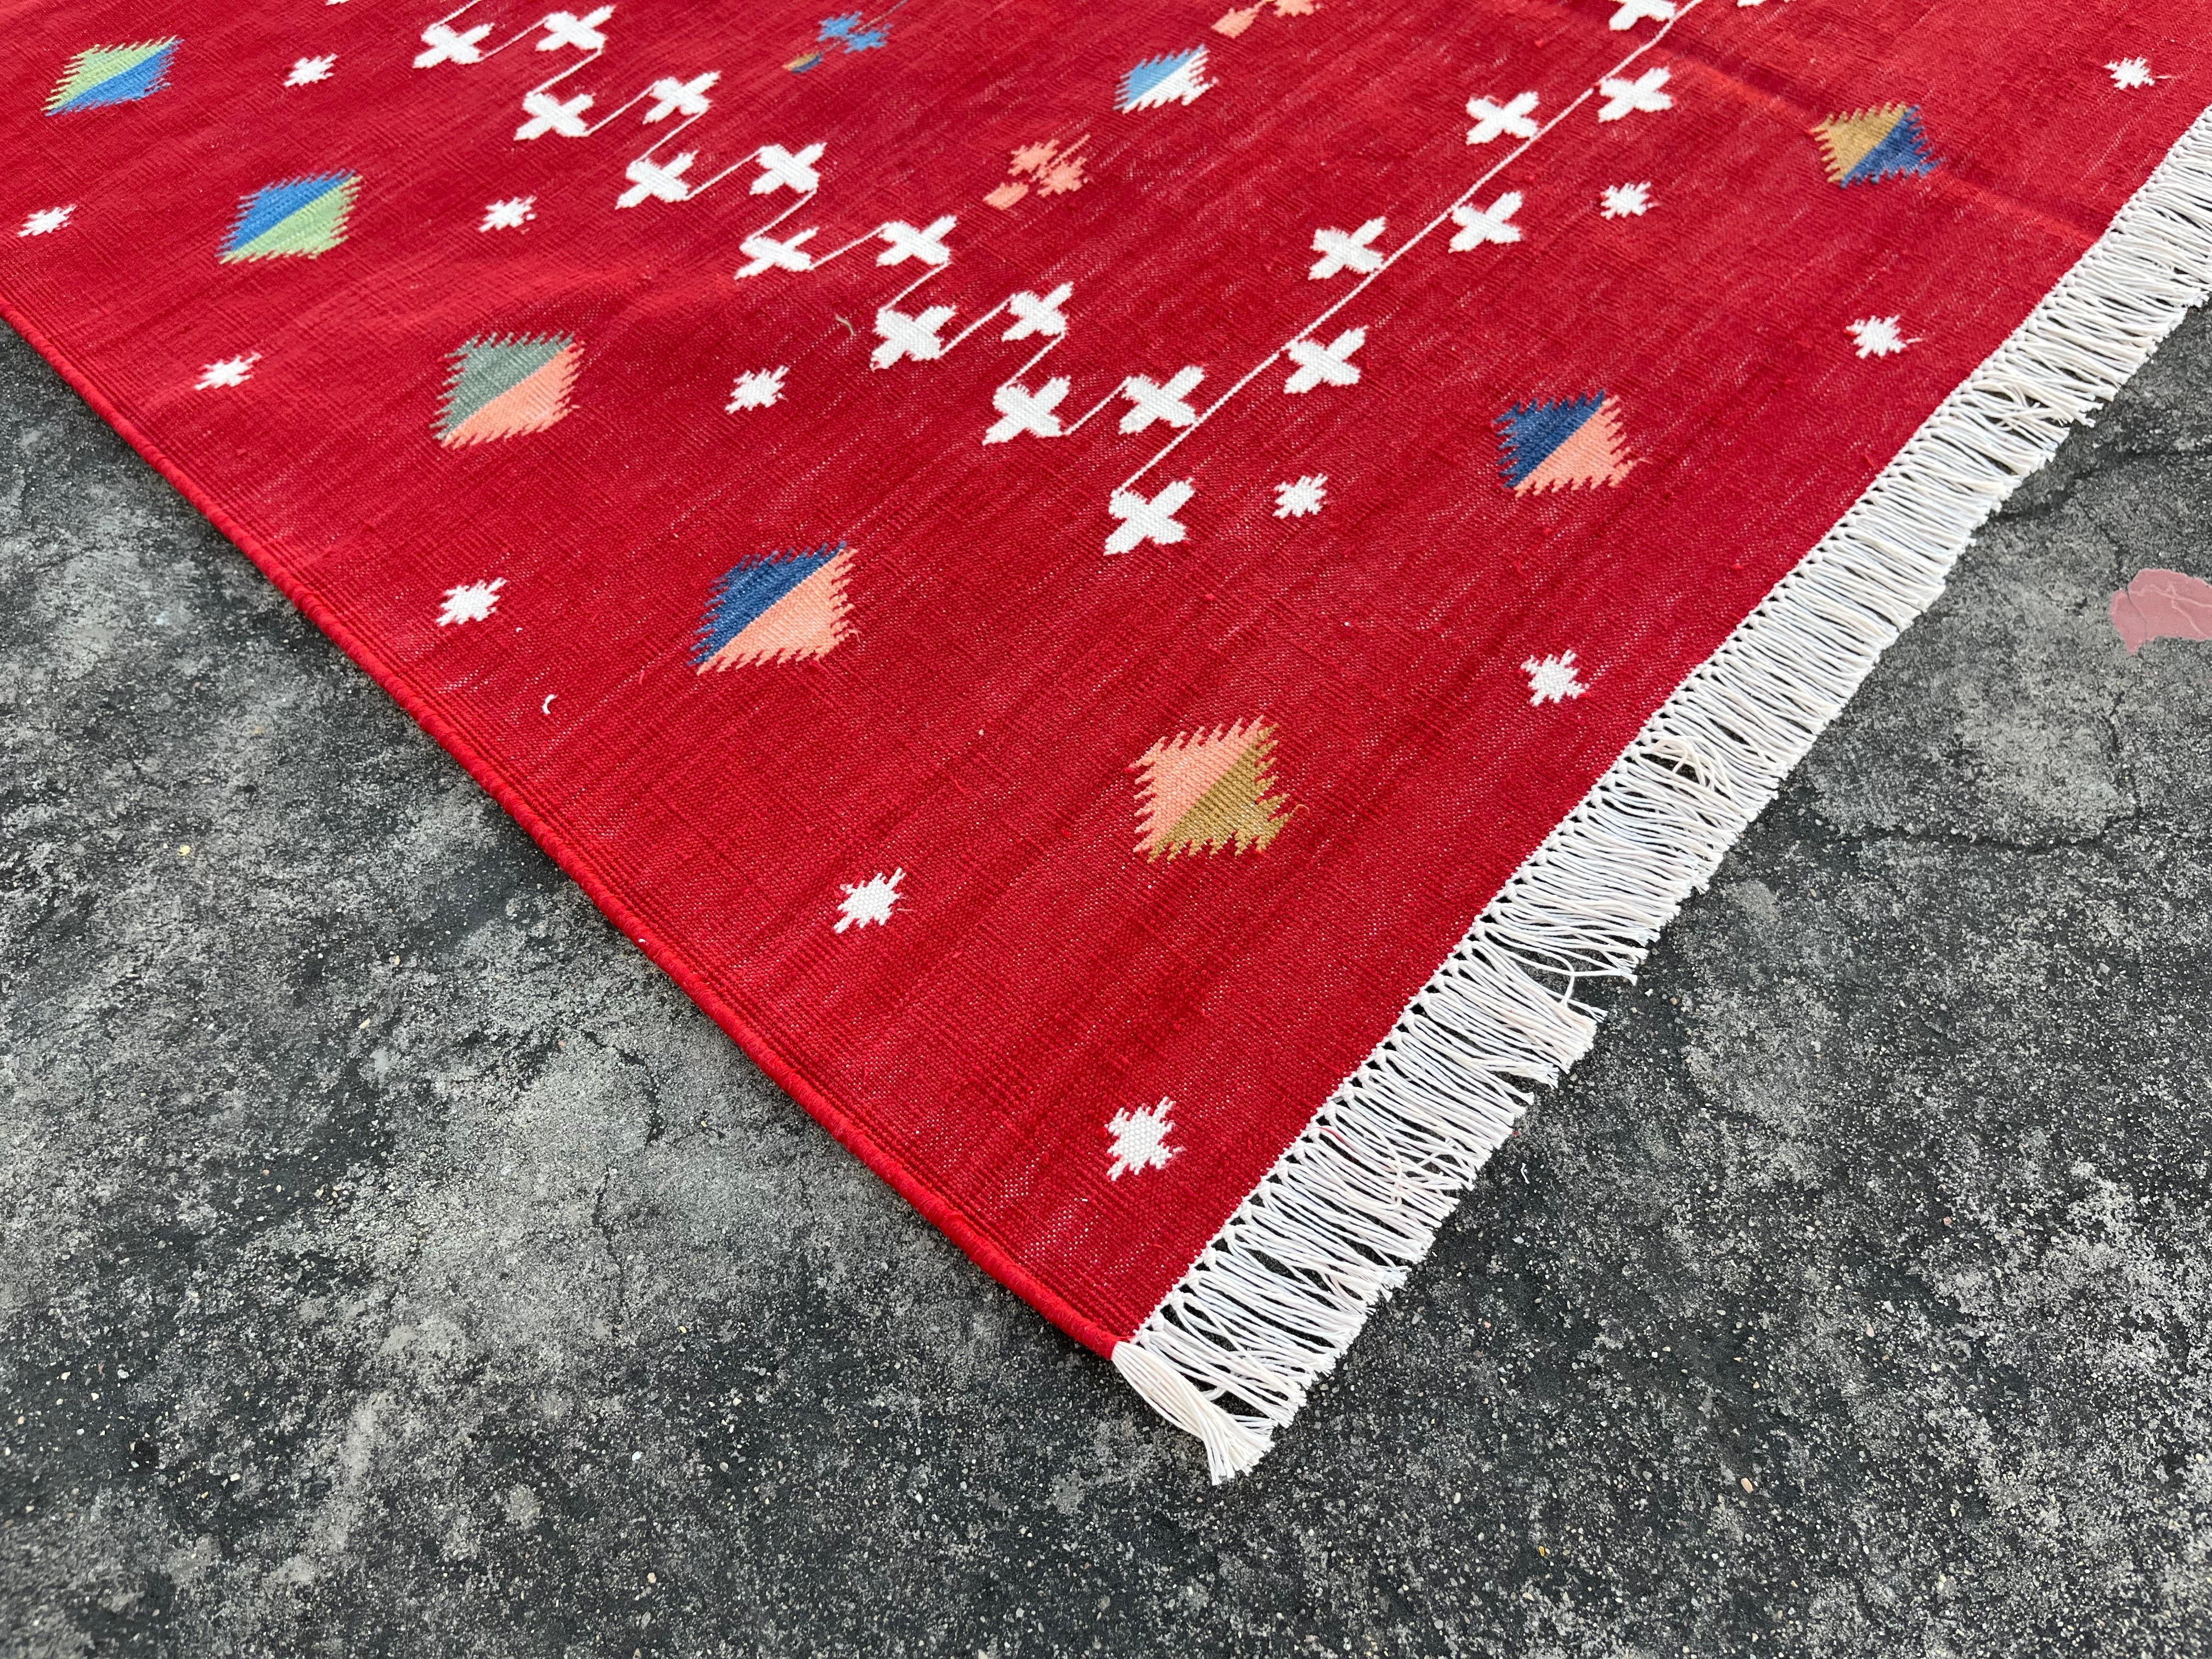 Mid-Century Modern Handmade Cotton Area Flat Weave Rug, 4x6 Red And White Shooting Star Dhurrie Rug For Sale